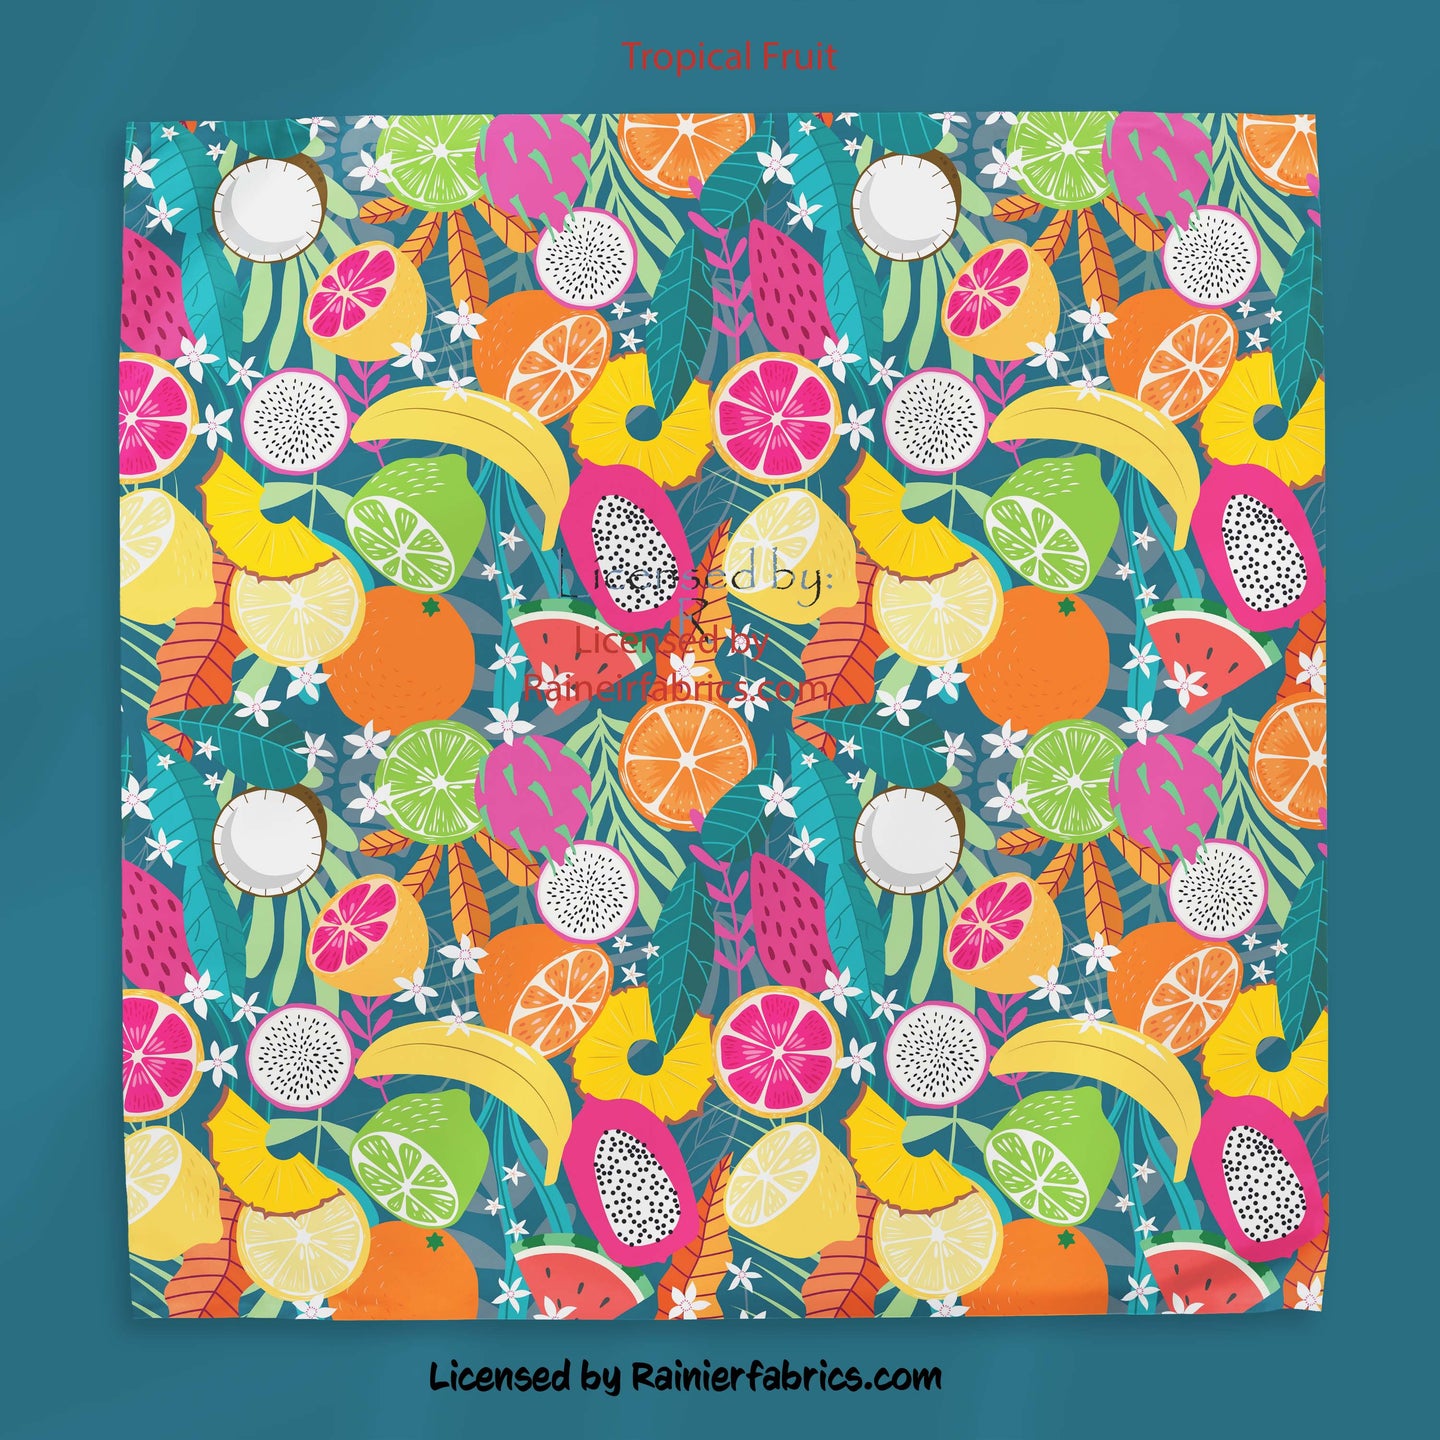 Tropical Fruits - 2-5 business days to ship - Order by 1/2 yard